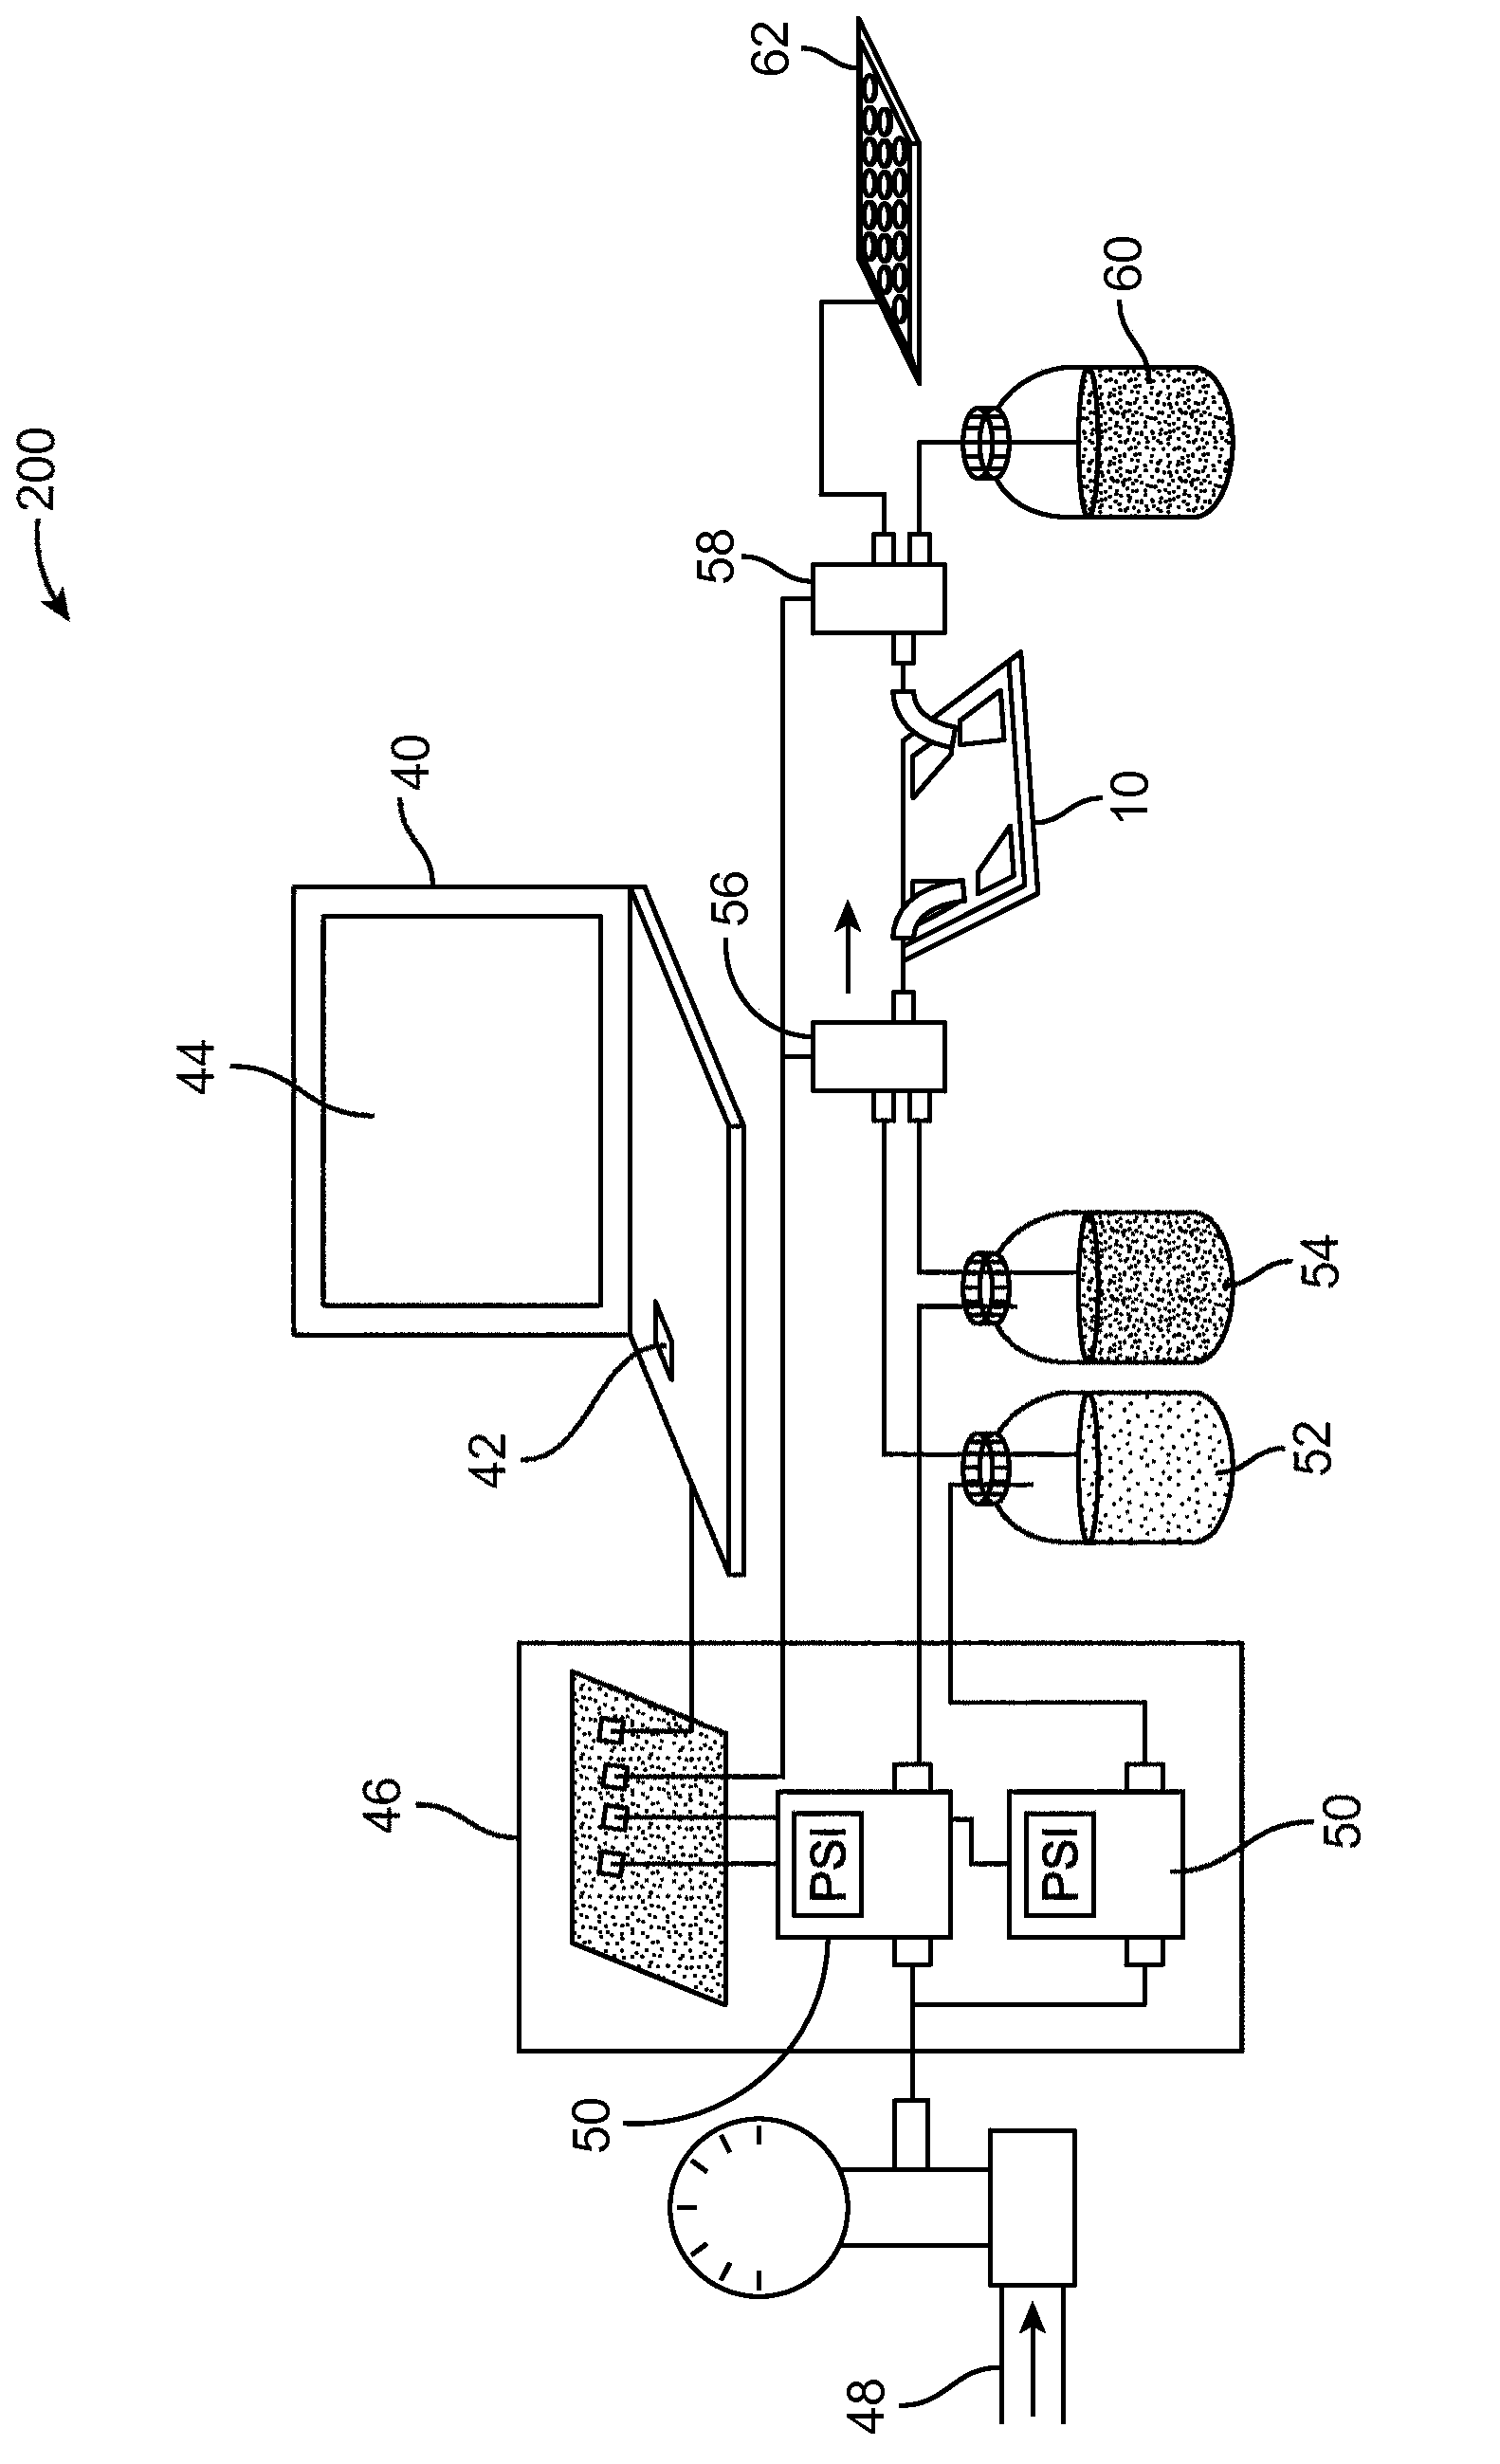 Method and device for isolating cells from heterogeneous solution using microfluidic trapping vortices